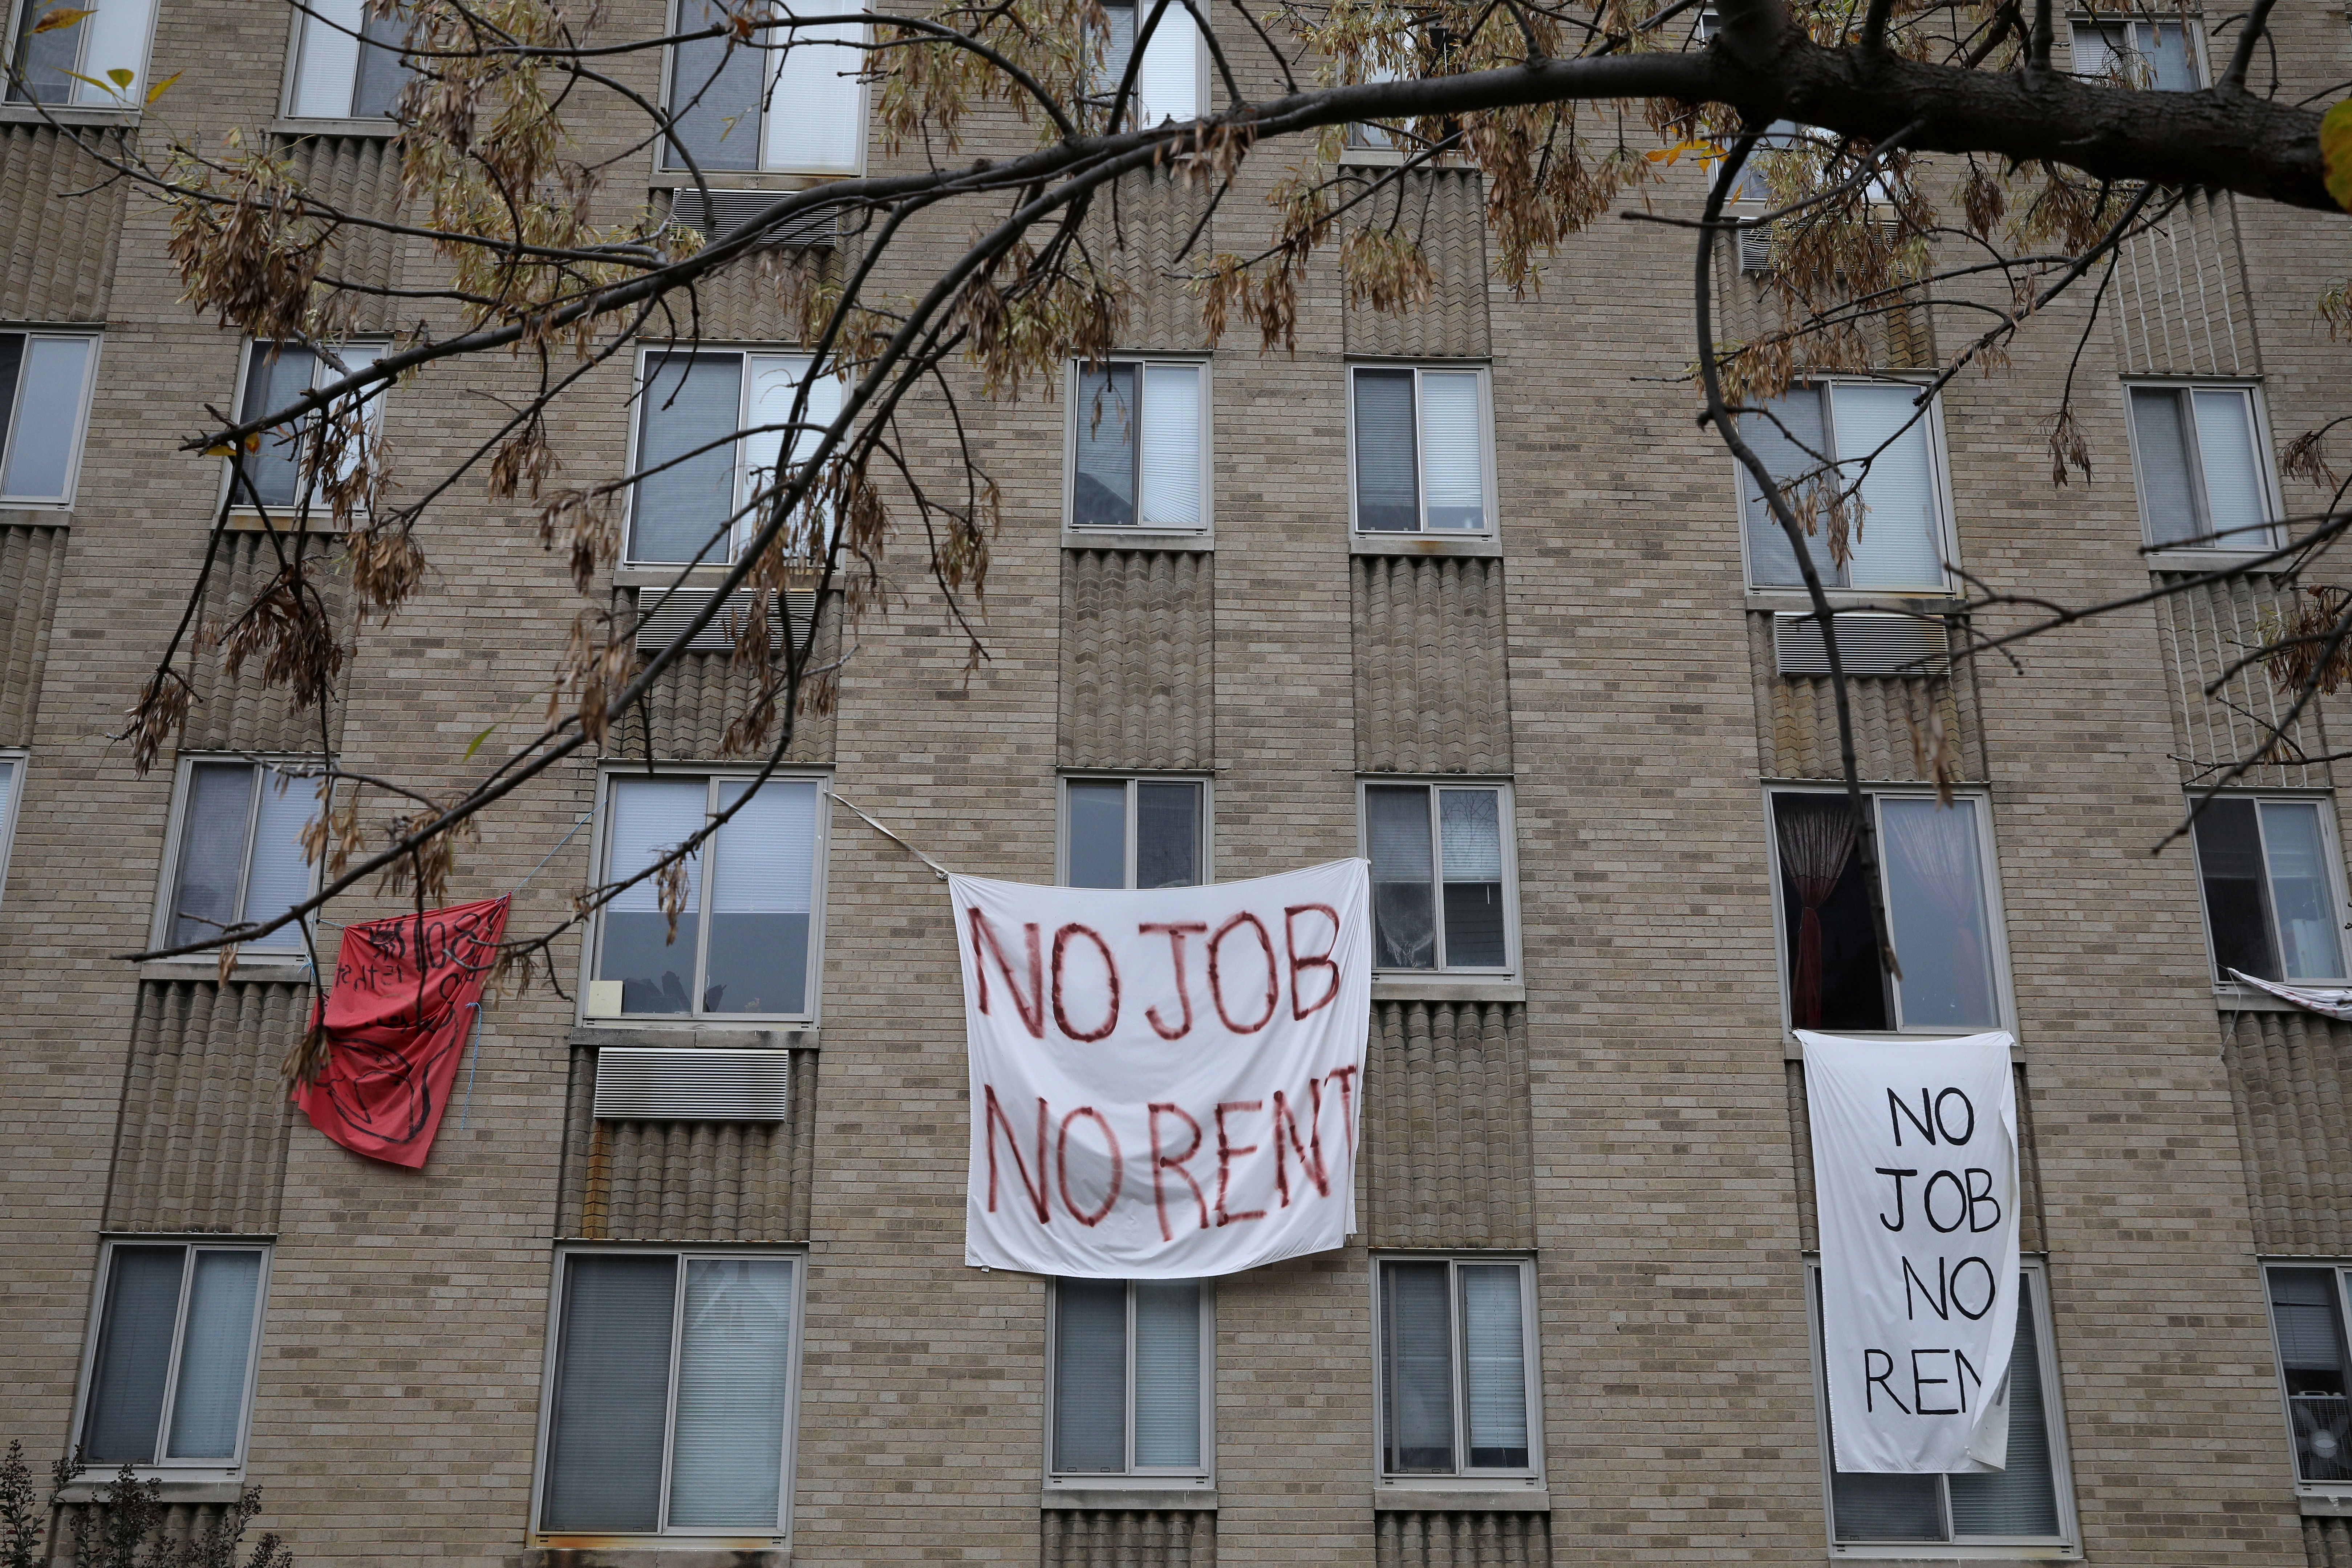 Makeshift sheets displaying messages of protest contesting the ability to pay for rent hang in a window of an apartment building in Washington